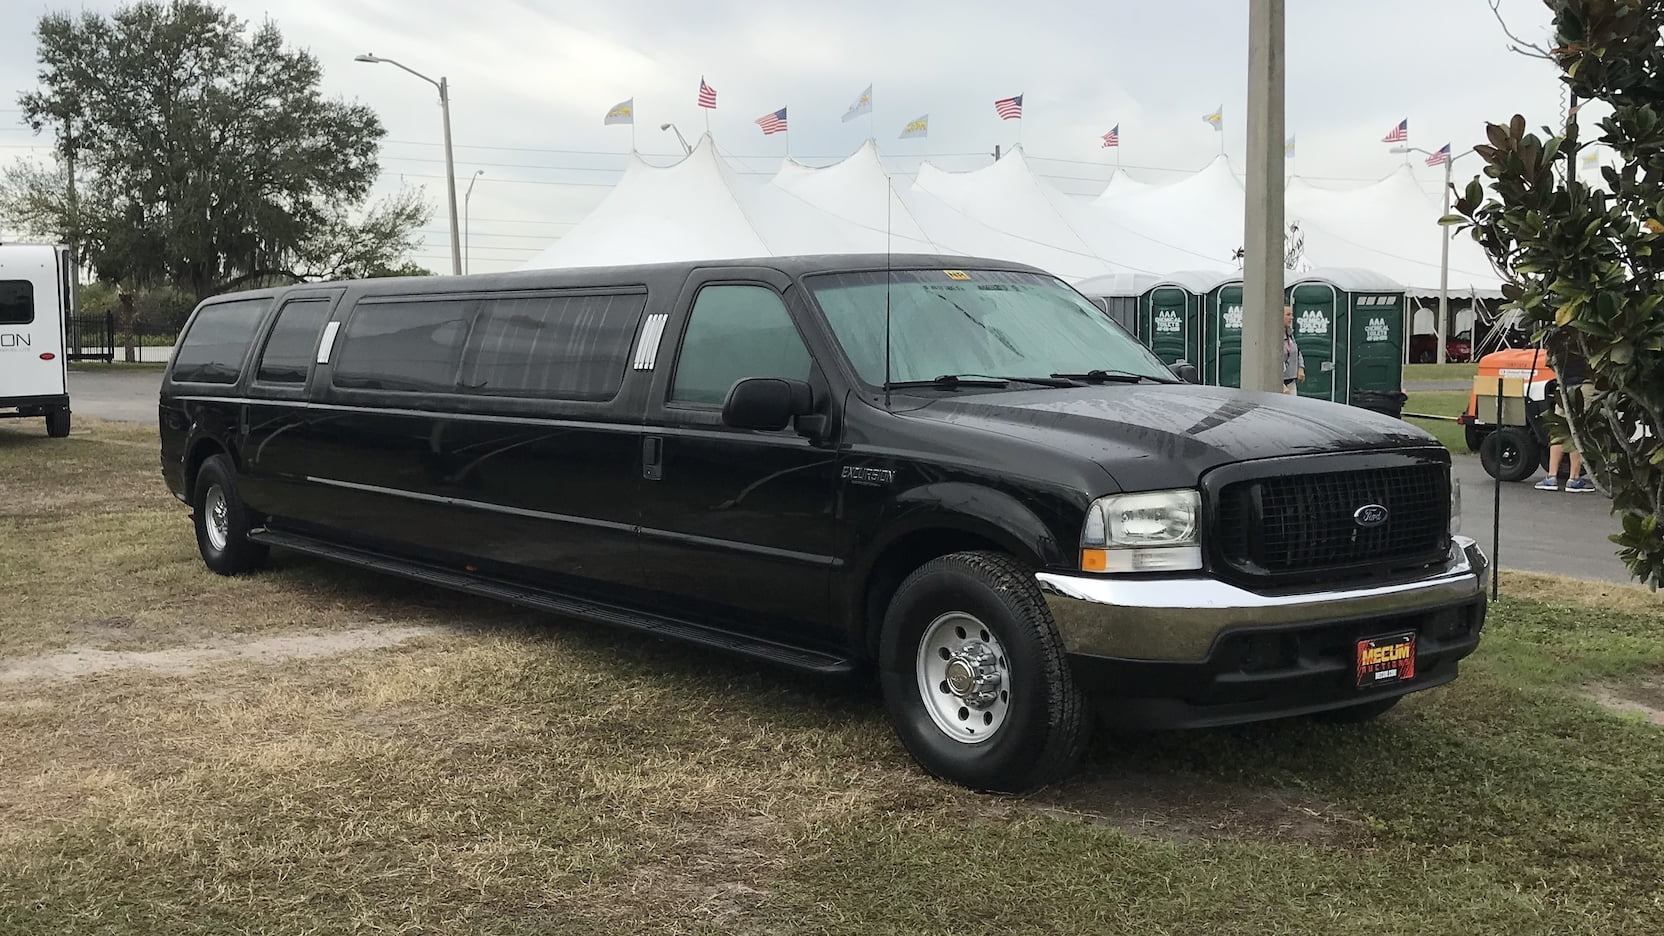 2003 Ford Excursion Limousine | W238.1 | Kissimmee 2019